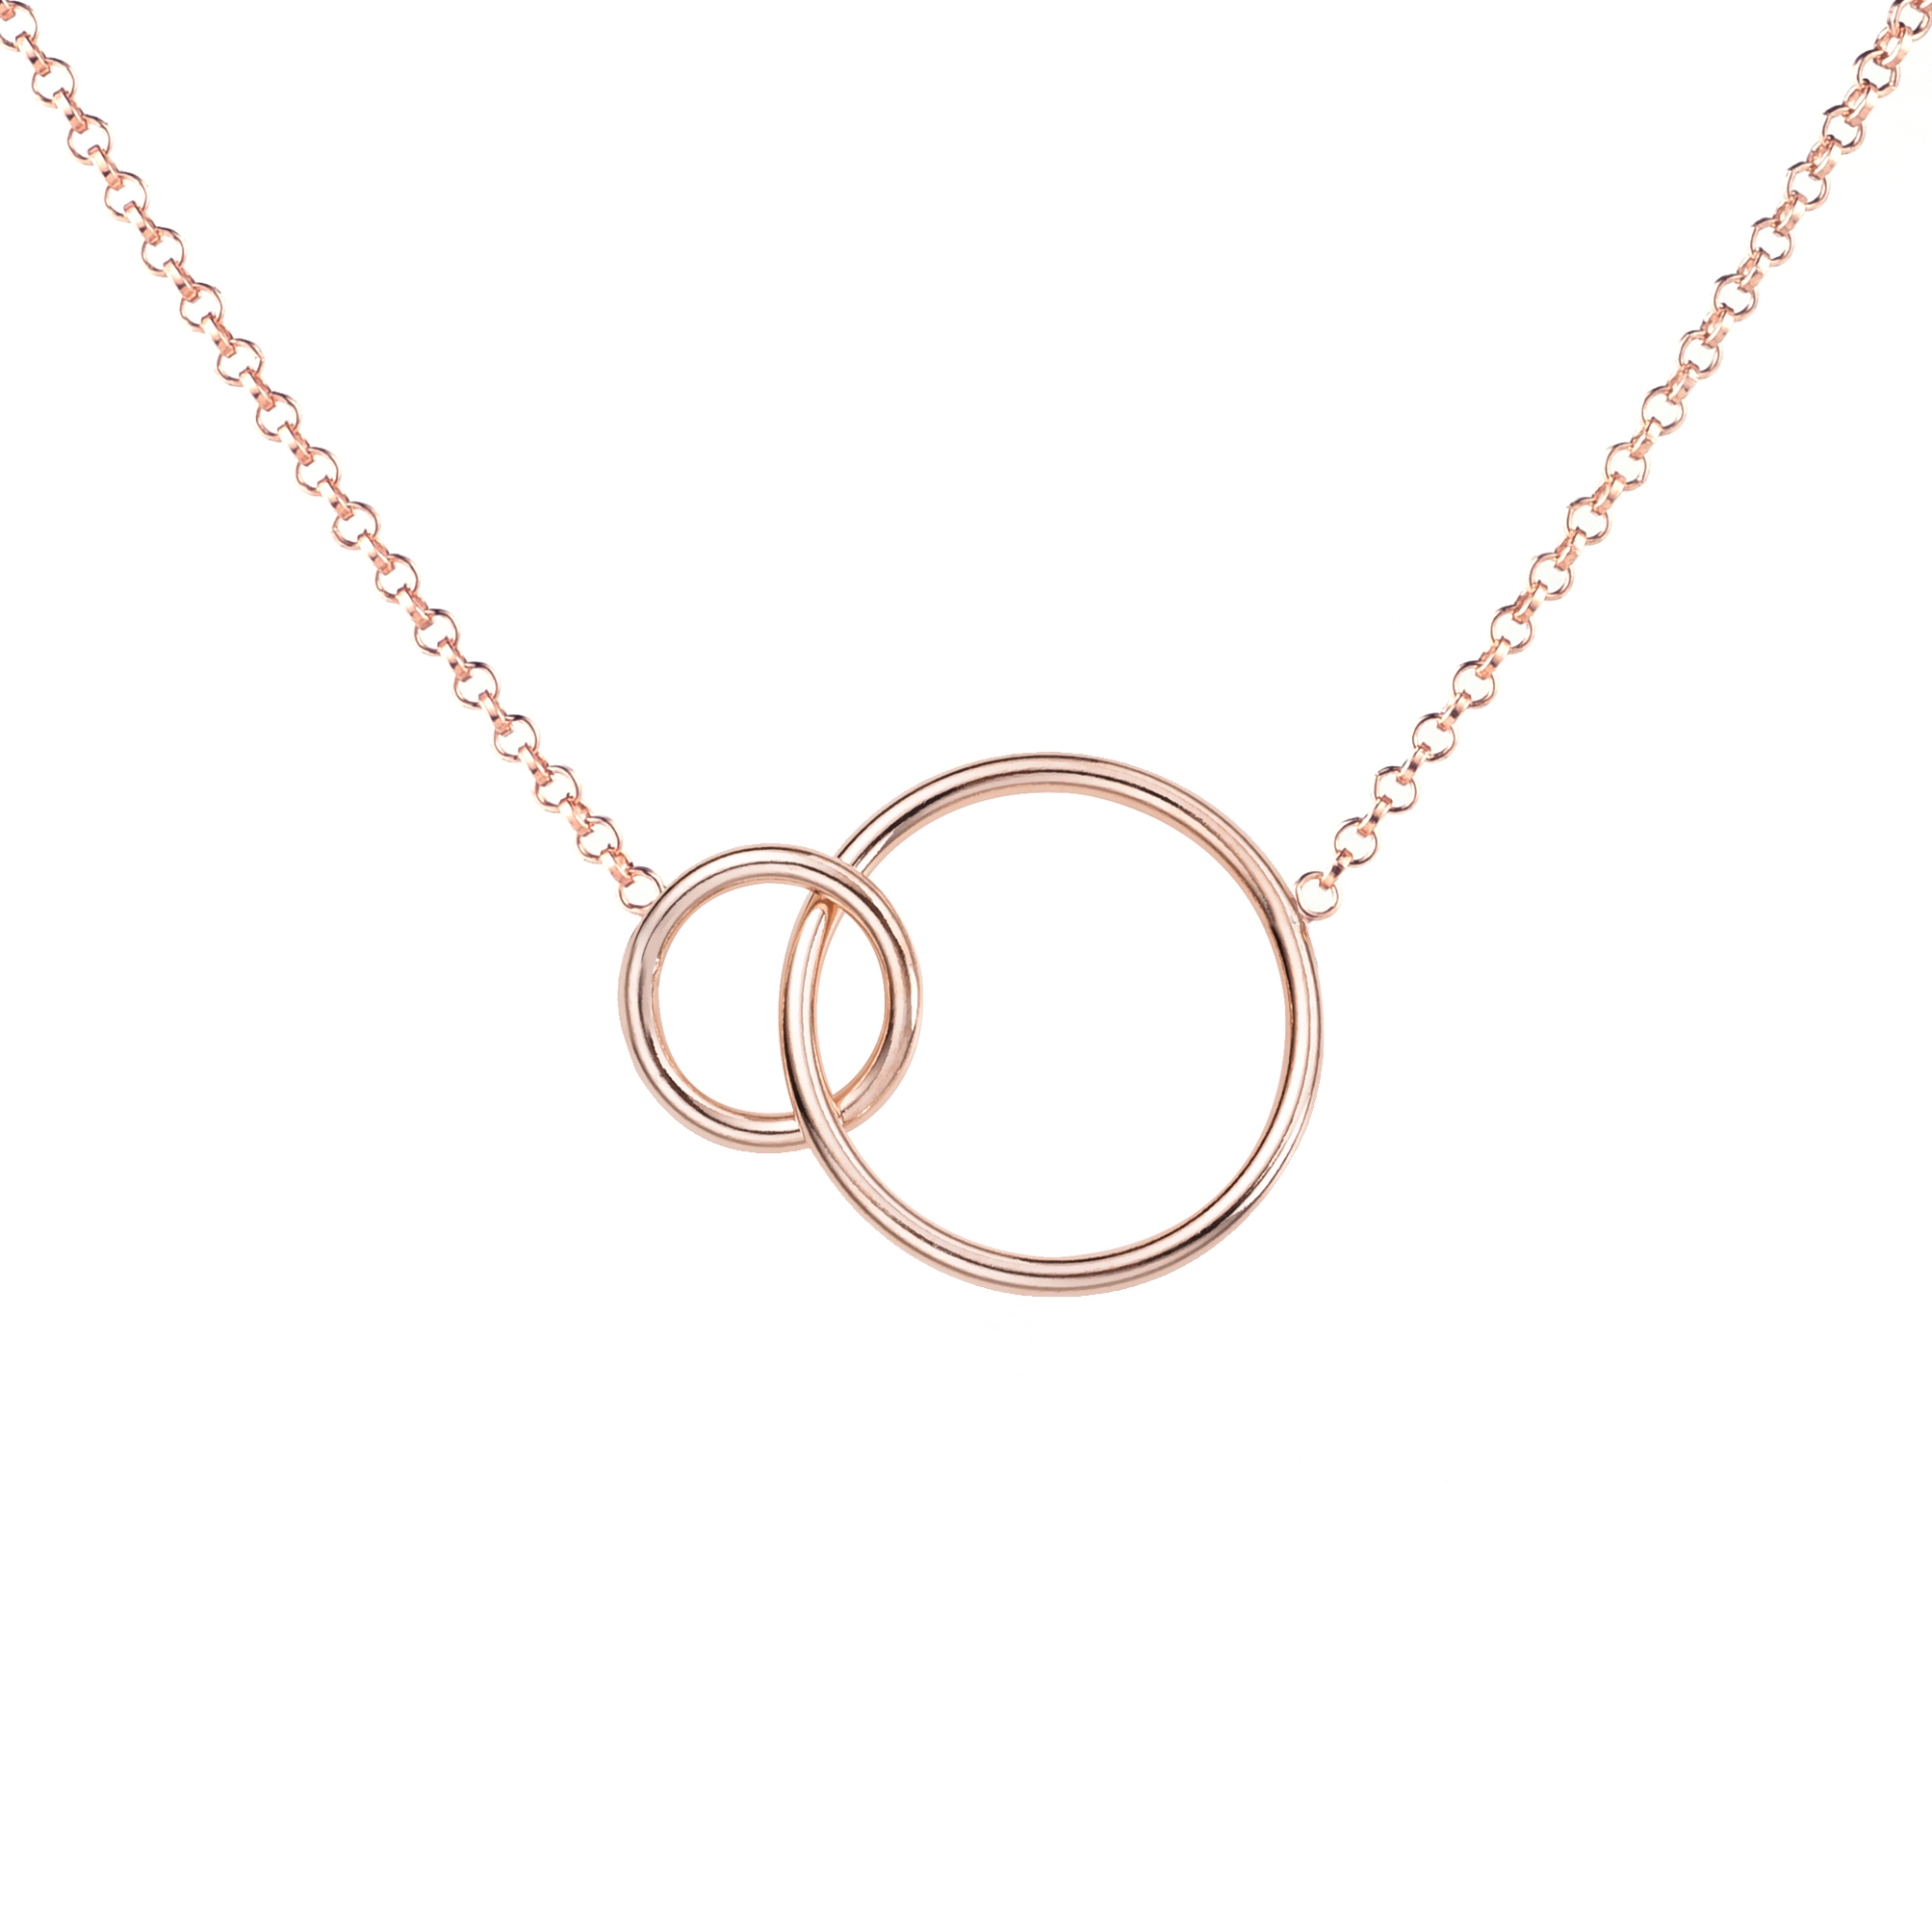 ZINZI Rose Gold Plated Sterling Silver Necklace with 2 Connected Open Circles 42-45cm ZIC1278R